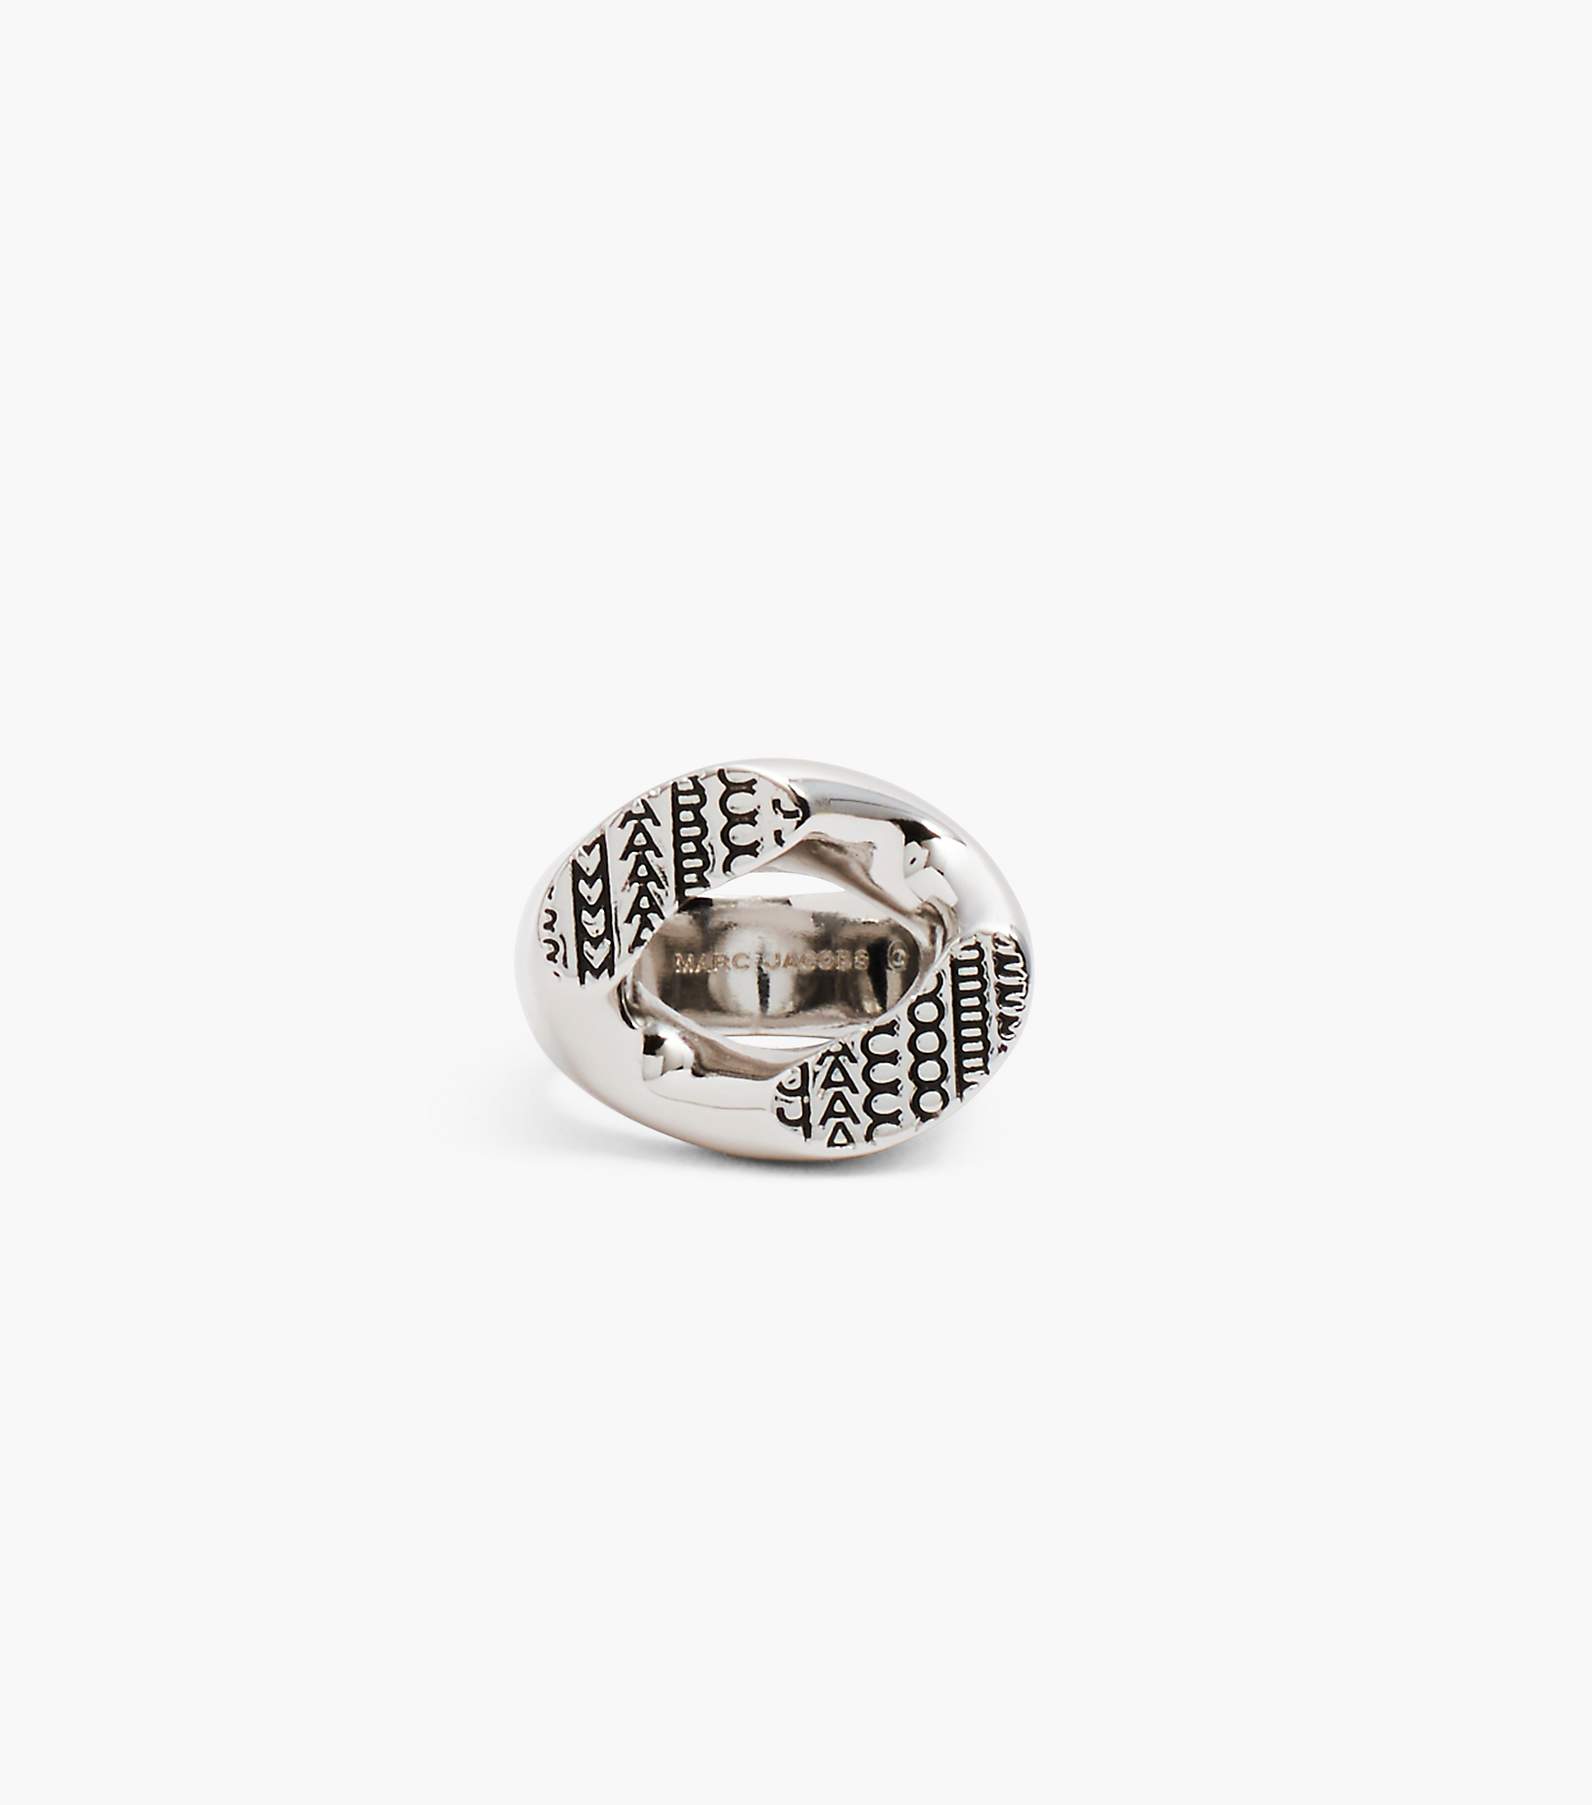 The Monogram Signet Ring in Light Antique Silver, Size 8